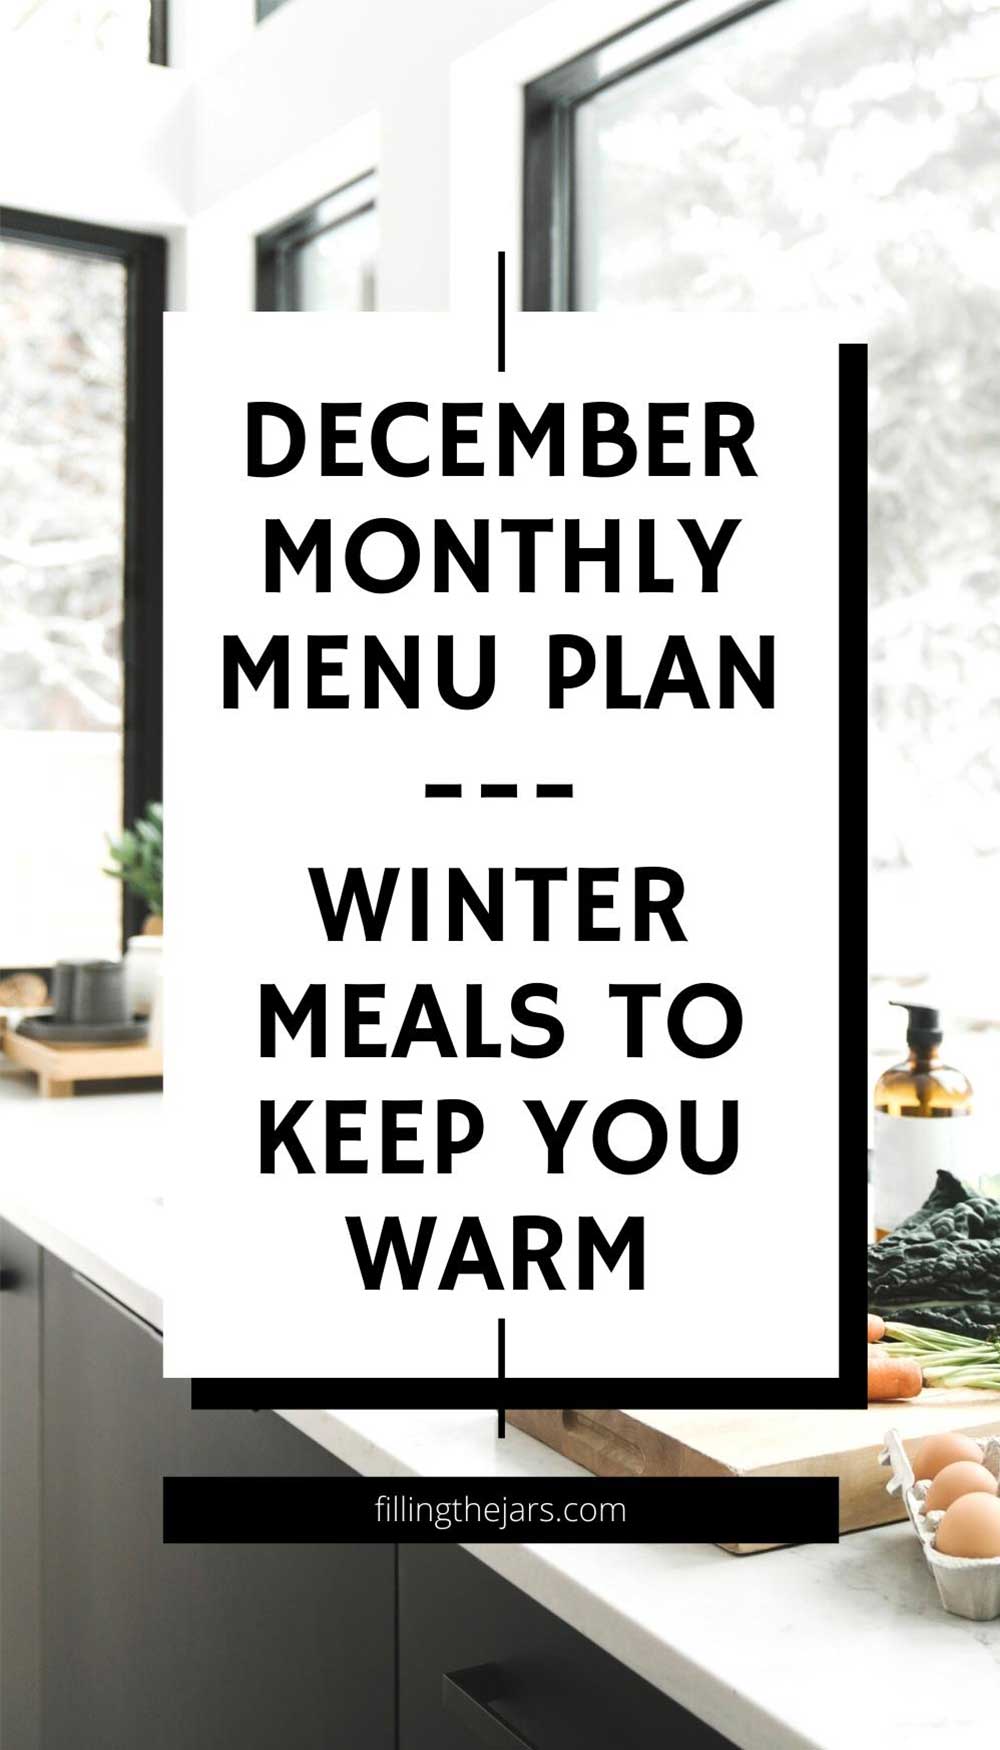 Text December monthly menu plan winter meals to keep you warm on white background over image of kitchen with view of winter scenery.